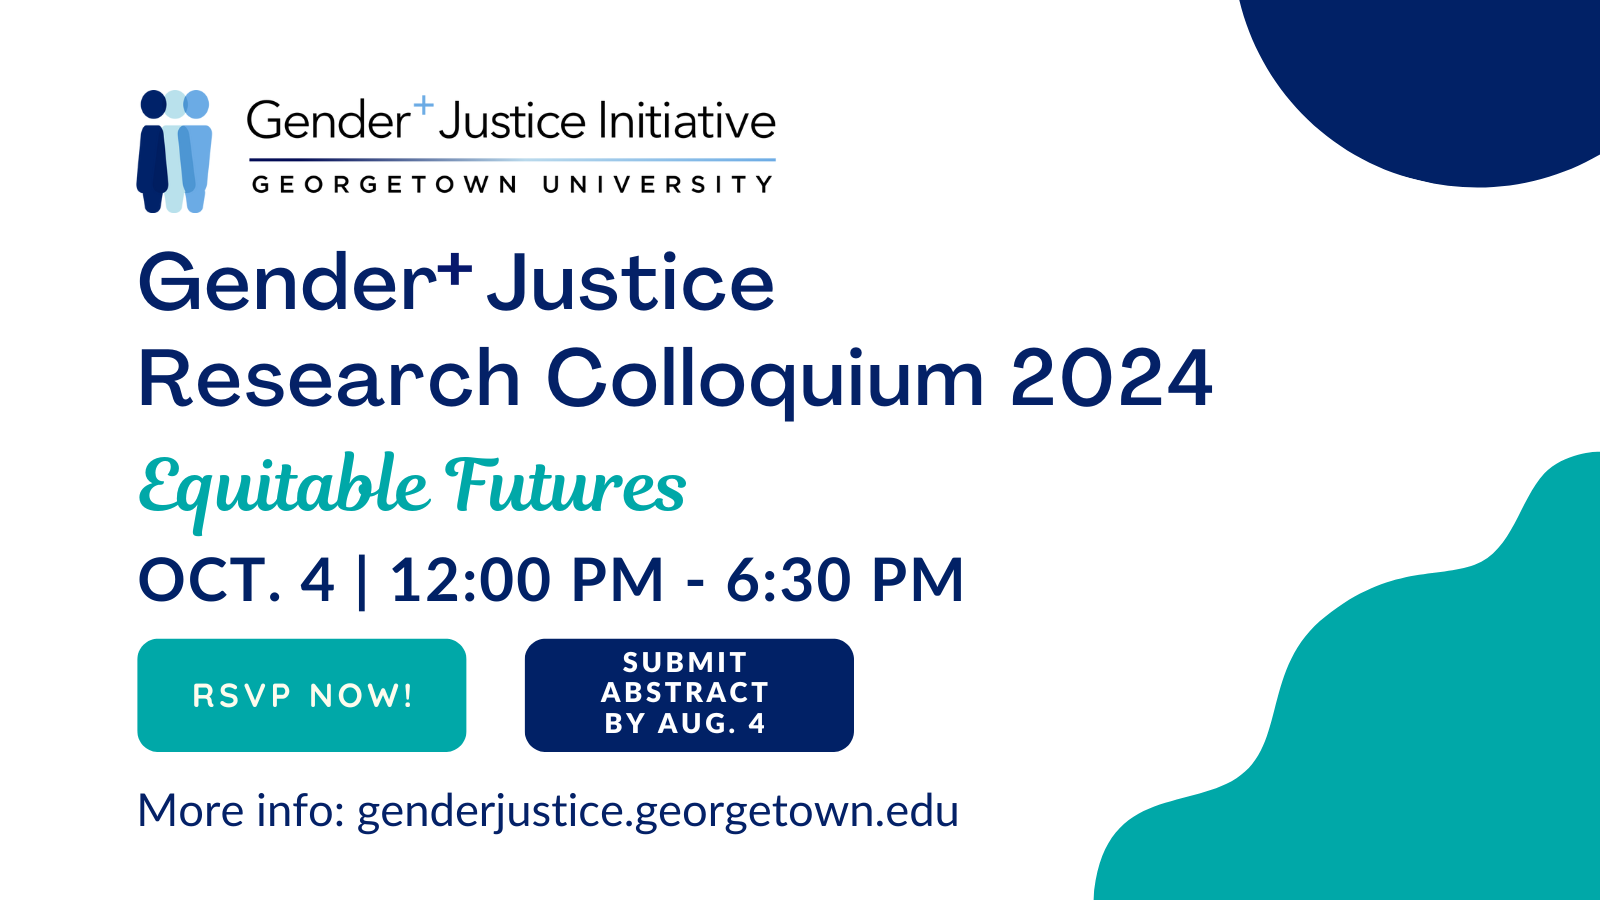 Flyer for Gender+ Justice Colloquium 2024 - white background and date and details in navy blue and teal.